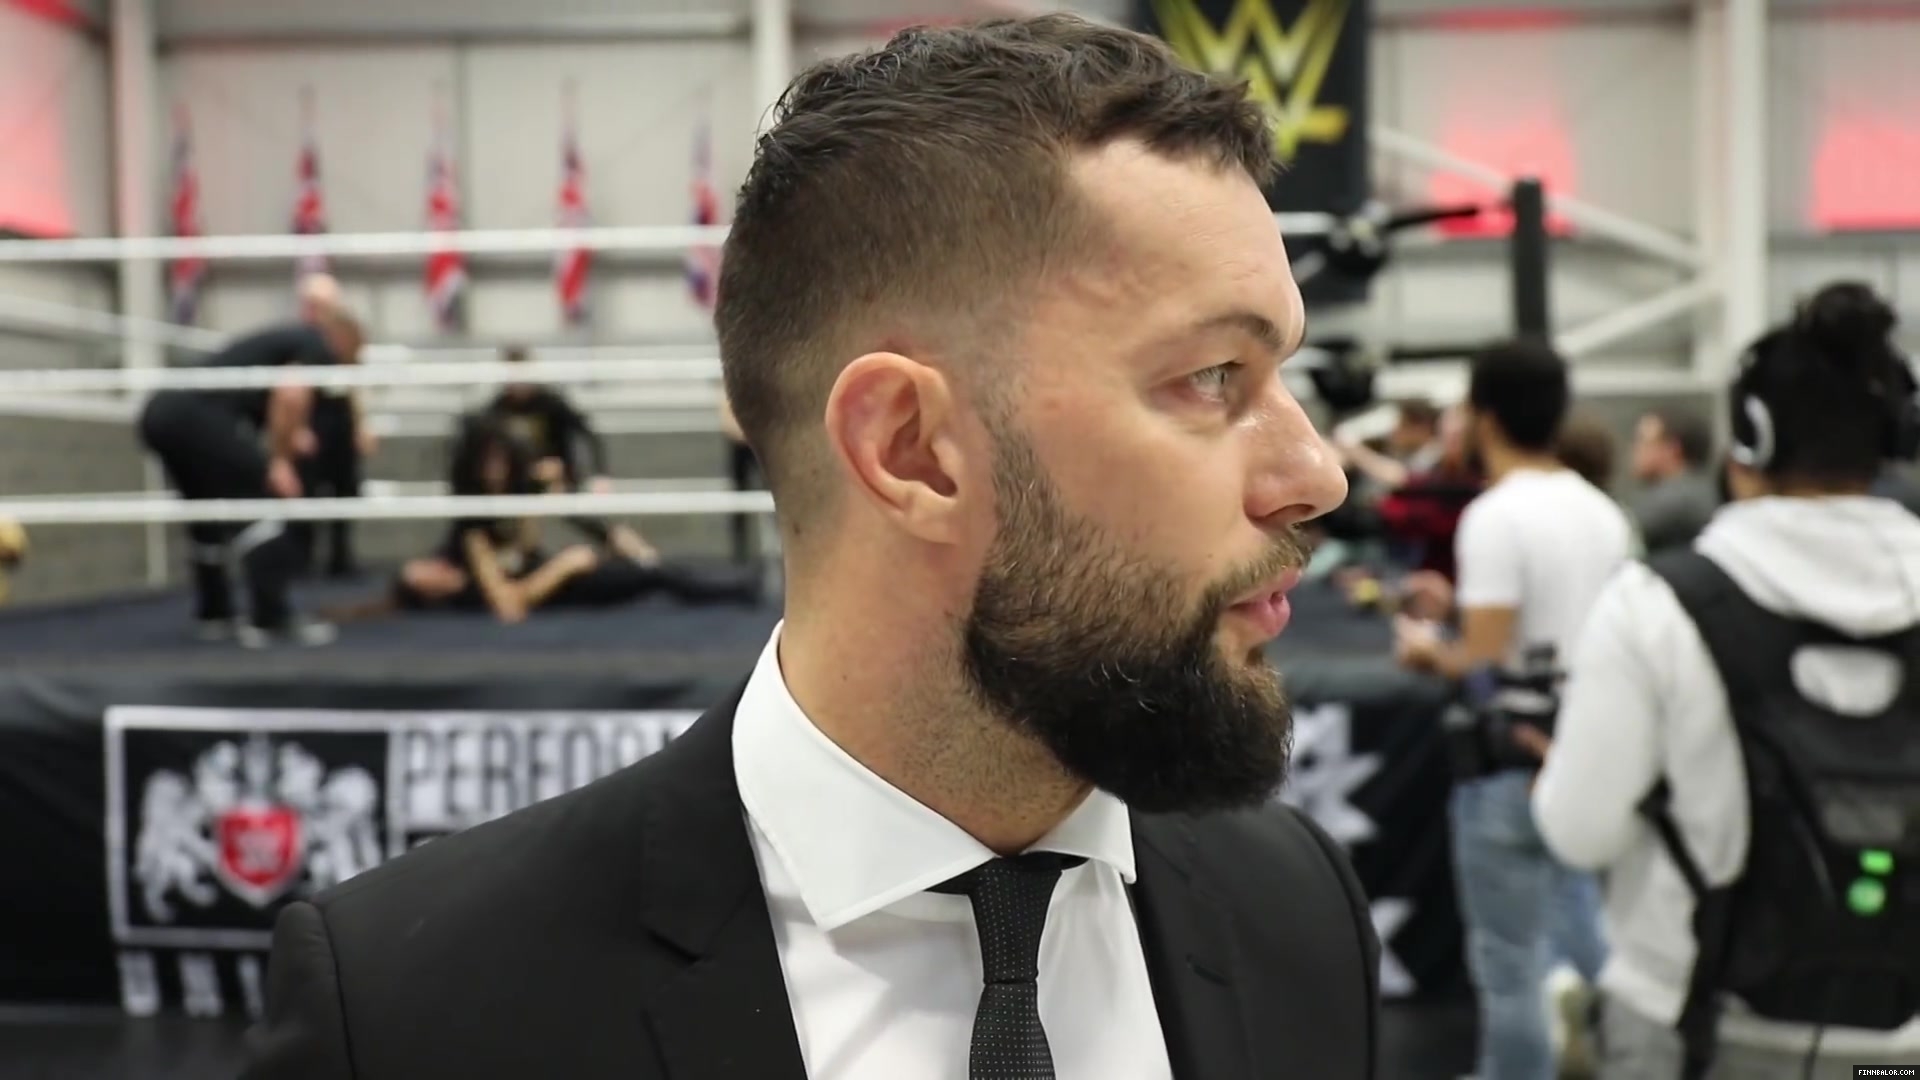 WWE_Superstar_FINN_BALOR_joins_MOUSTACHE_MOUNTAIN_at_the_opening_of_the_NXT_UK_PC_144.jpg